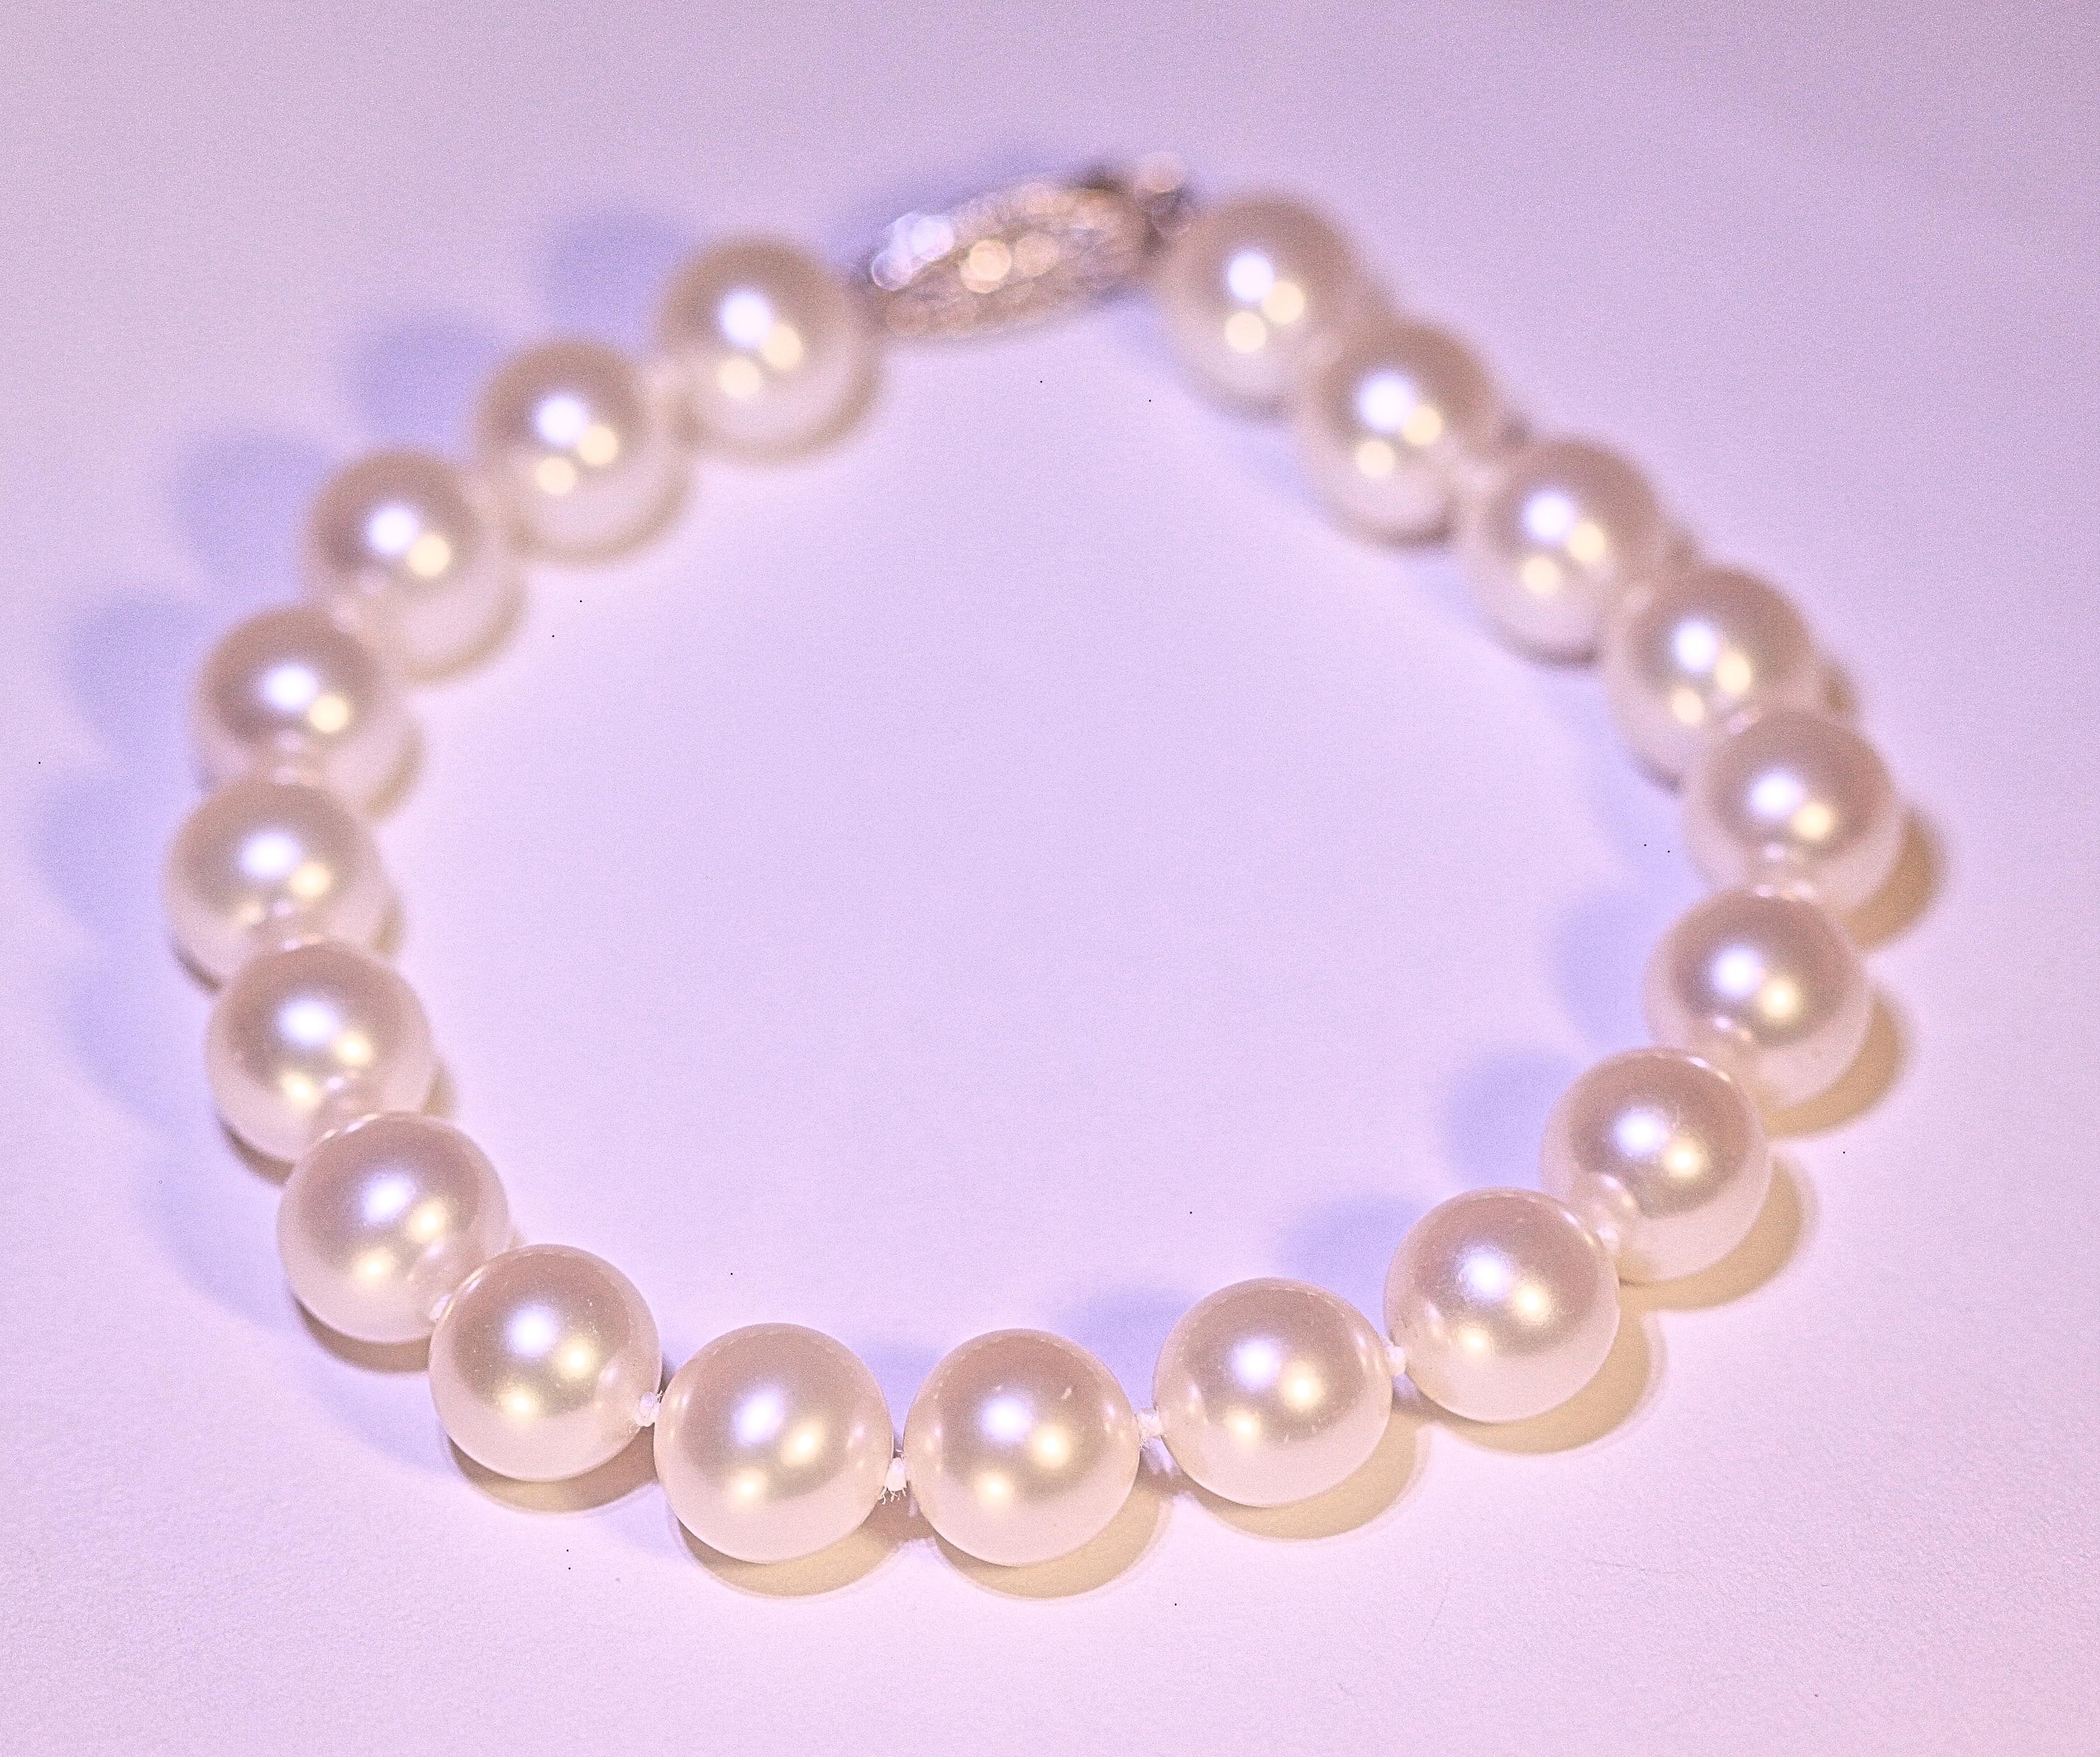 A pearl bracelet that measures eight inches long with 19 South Sea pearls.   The pearls measure 9 mm, they are cream white in color with nice luster and minor blemishes.  The bracelet has a 14 karat white gold clasp.